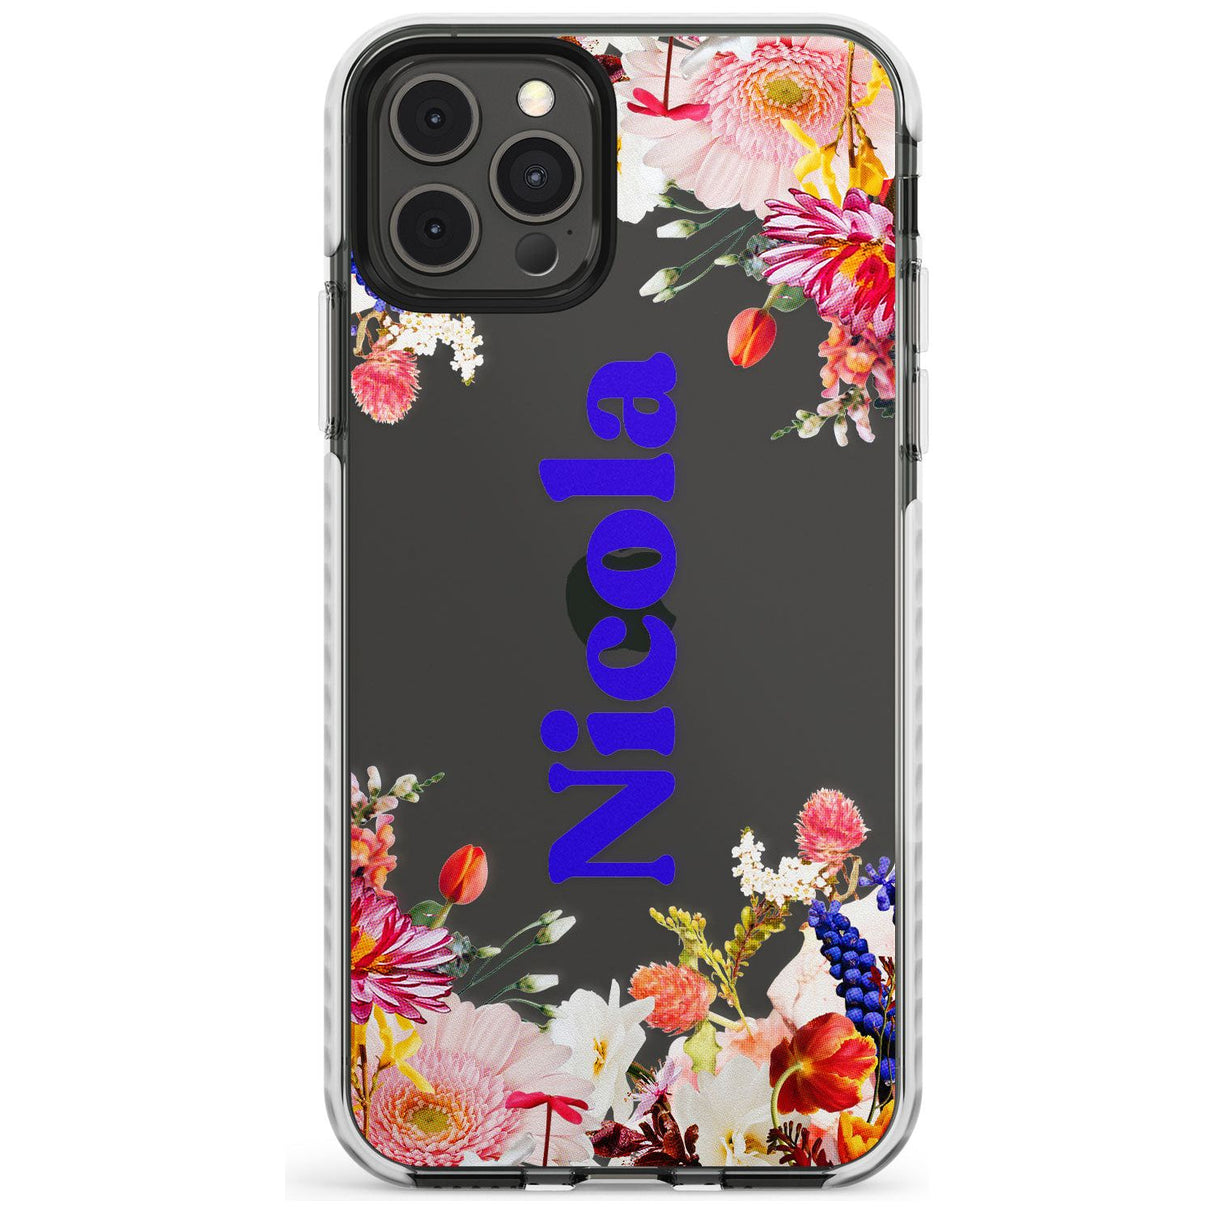 Custom Text with Floral Borders Slim TPU Phone Case for iPhone 11 Pro Max